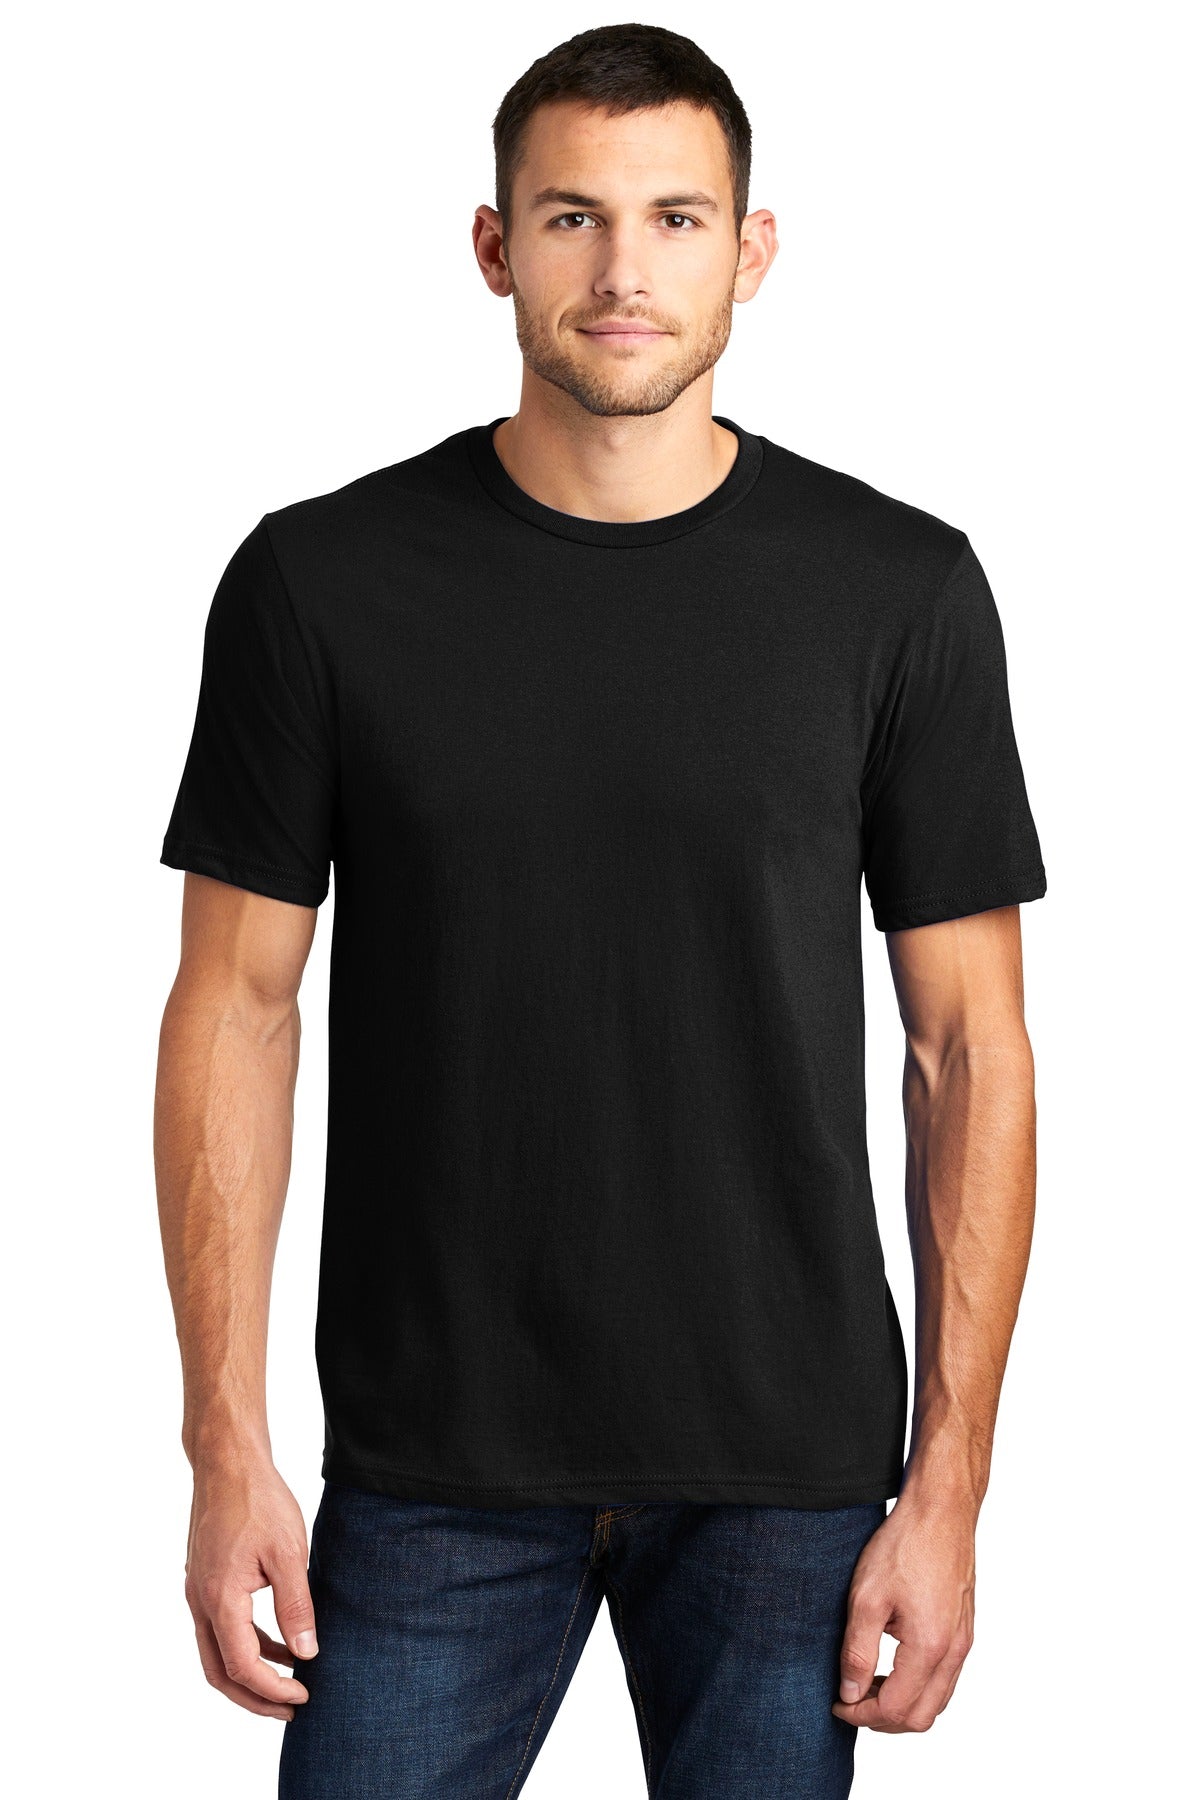 District® Very Important Tee®. DT6000 - DFW Impression